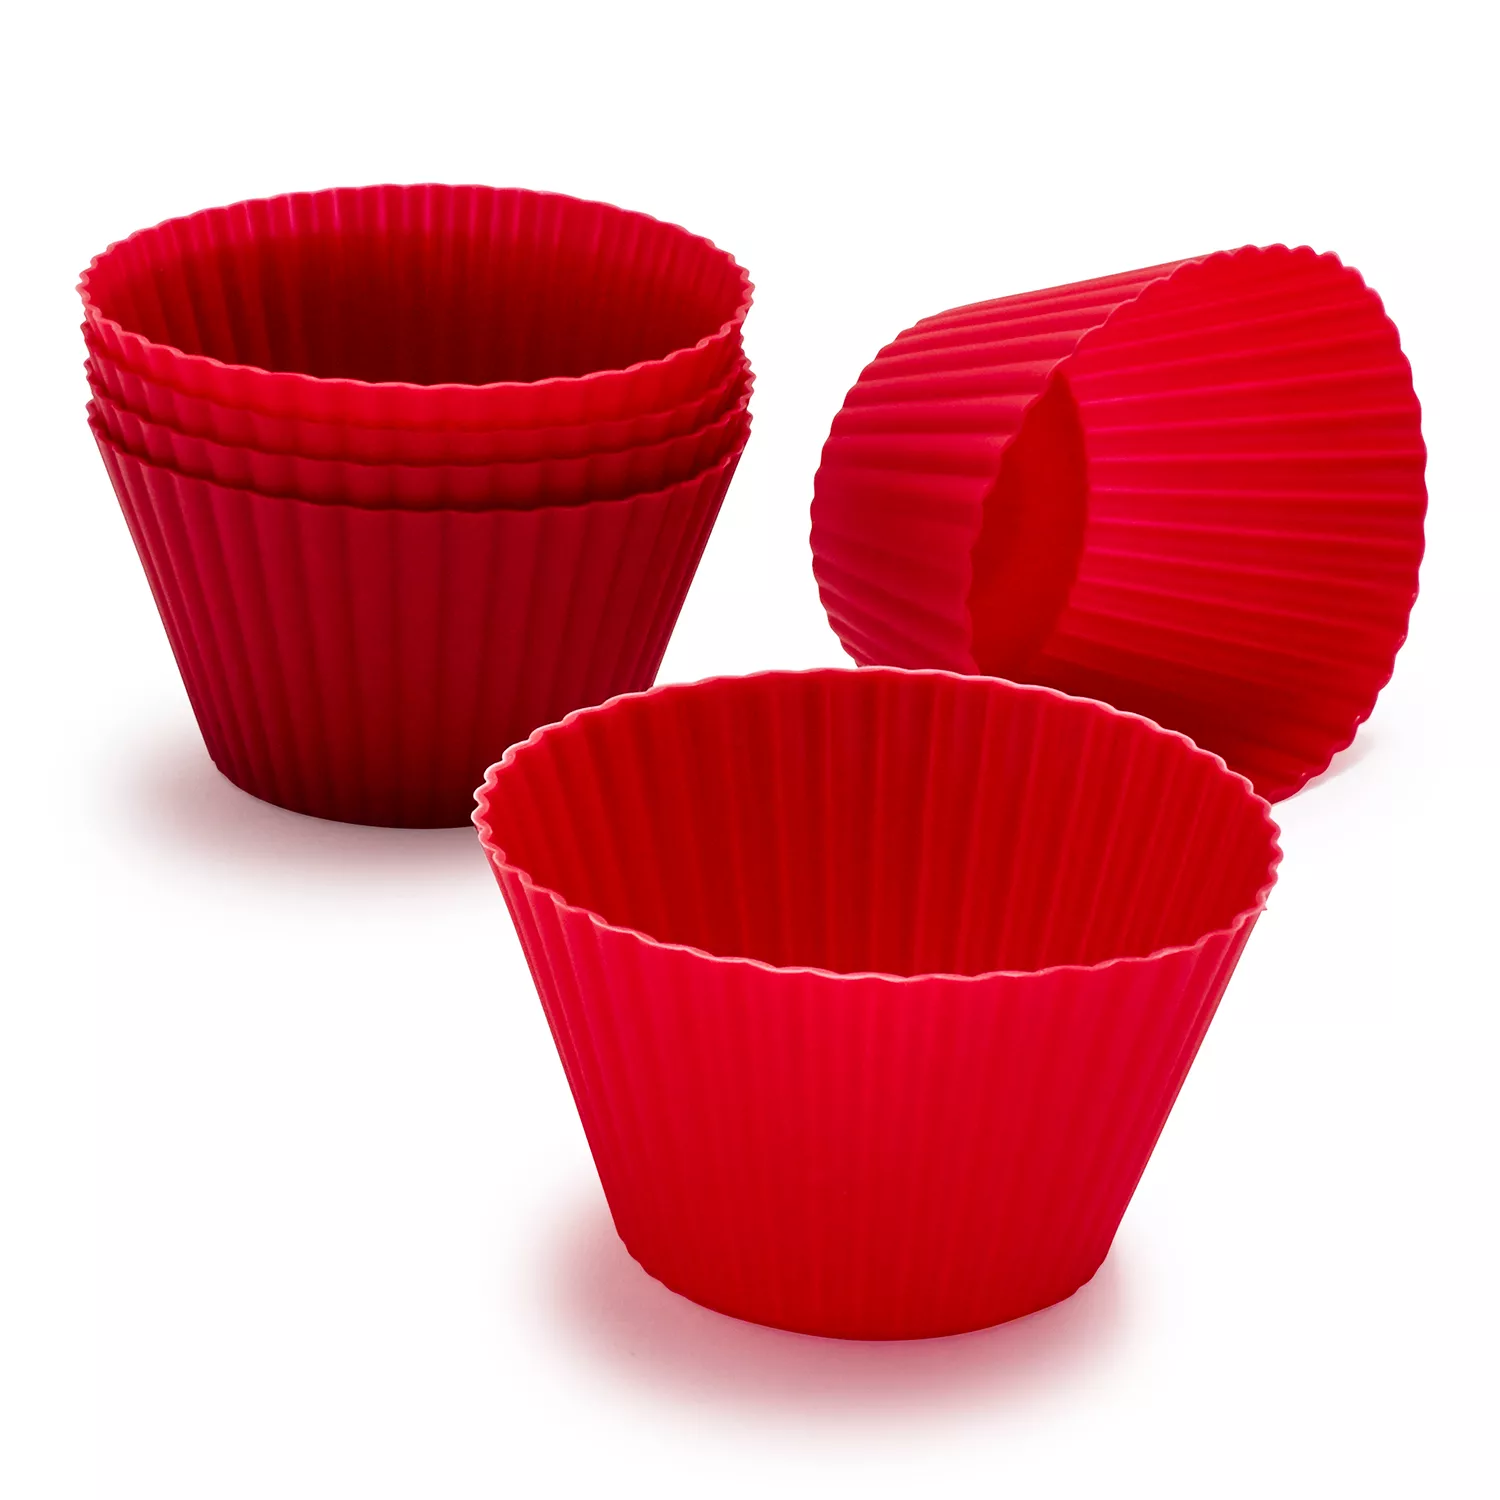 Sur La Table Jumbo Silicone Bake Cups, Set of 6, Red